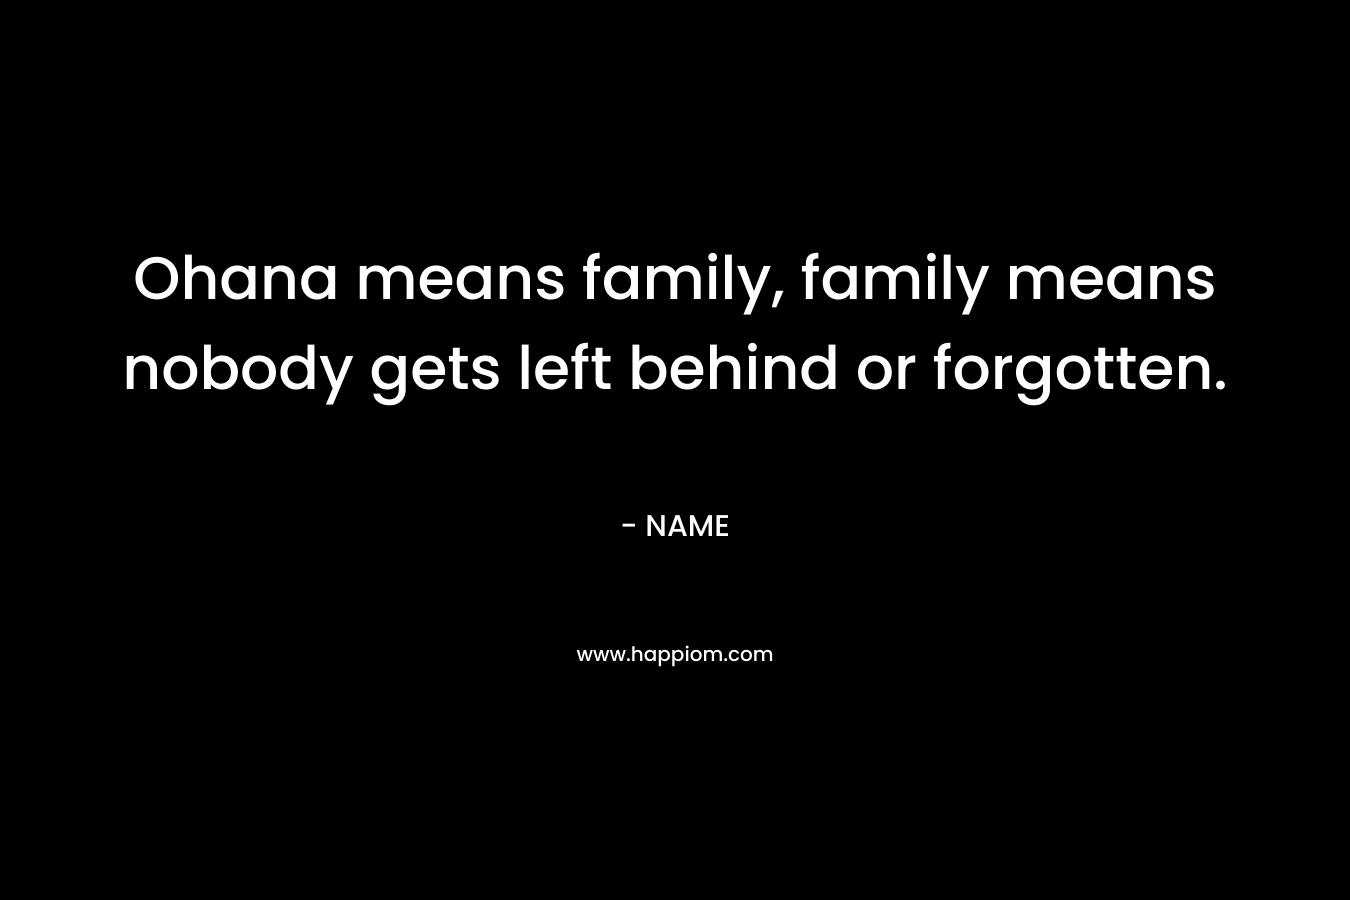 Ohana means family, family means nobody gets left behind or forgotten.